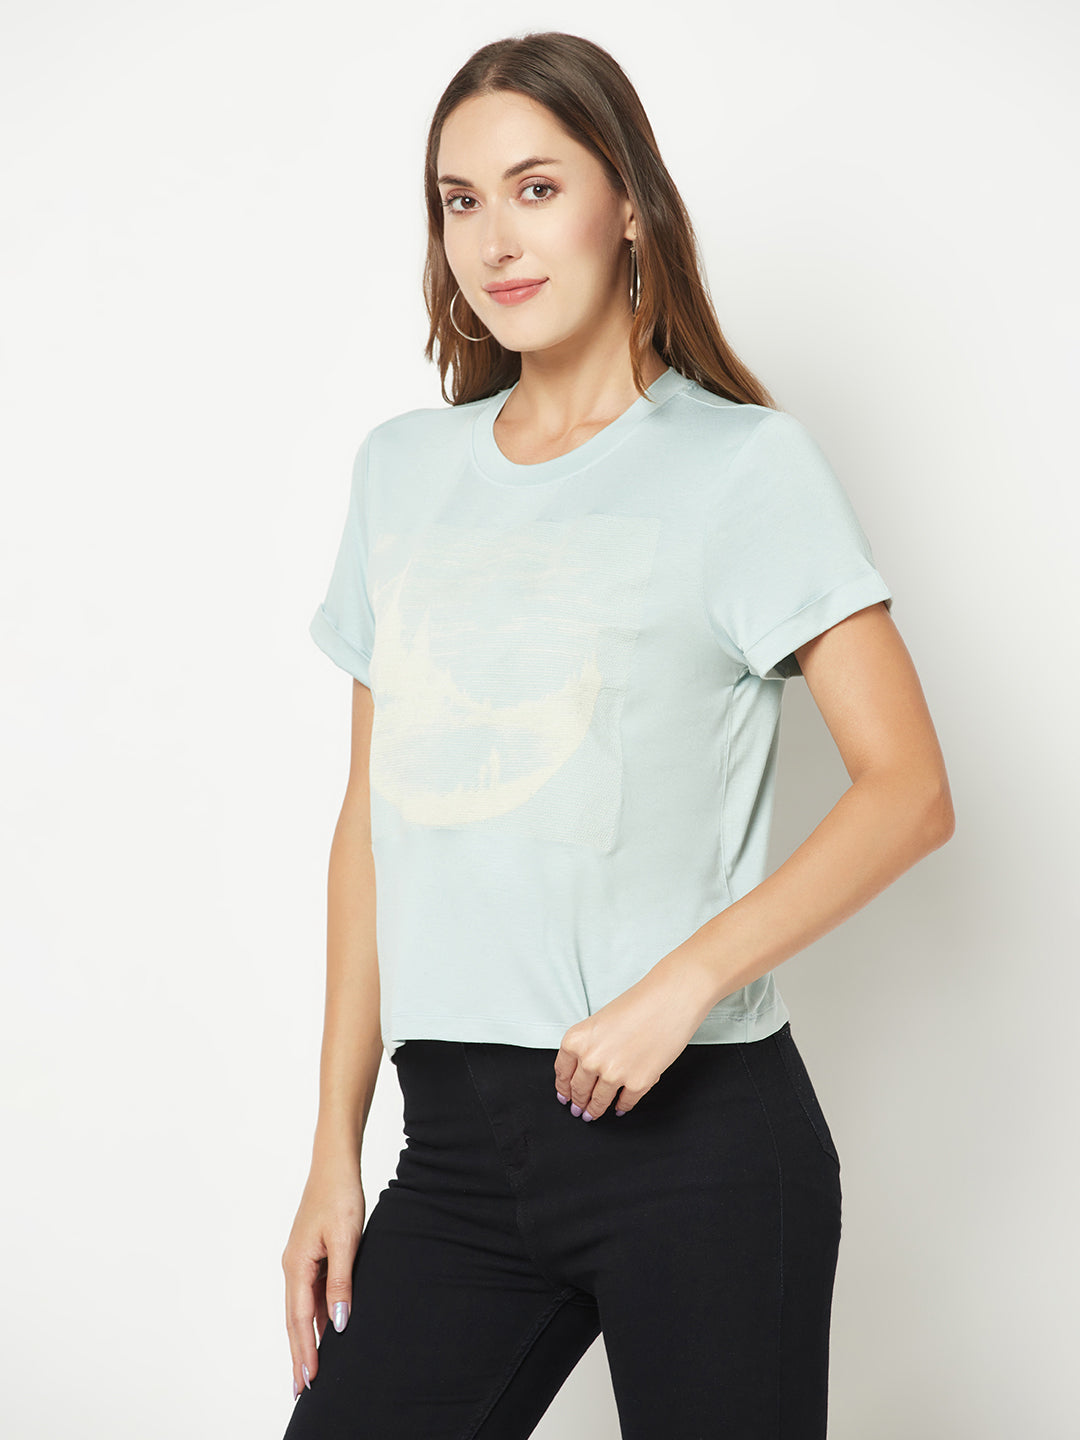 Embroidered blue t-shirt